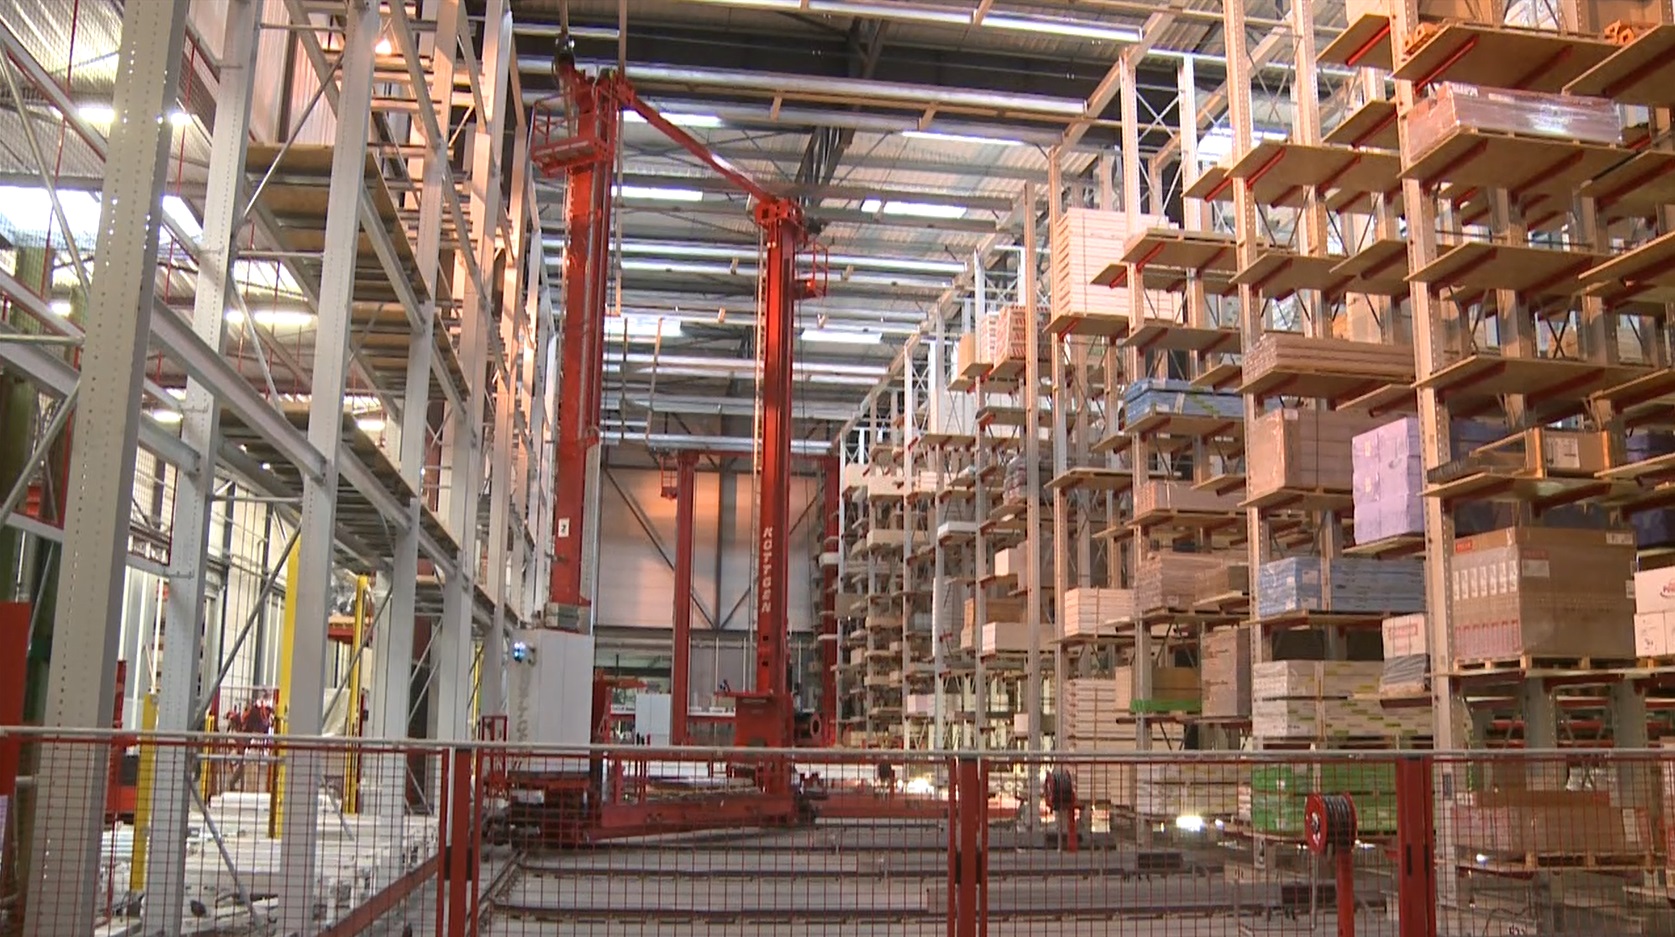 cantilever racking, automated warehouse, stacker crane